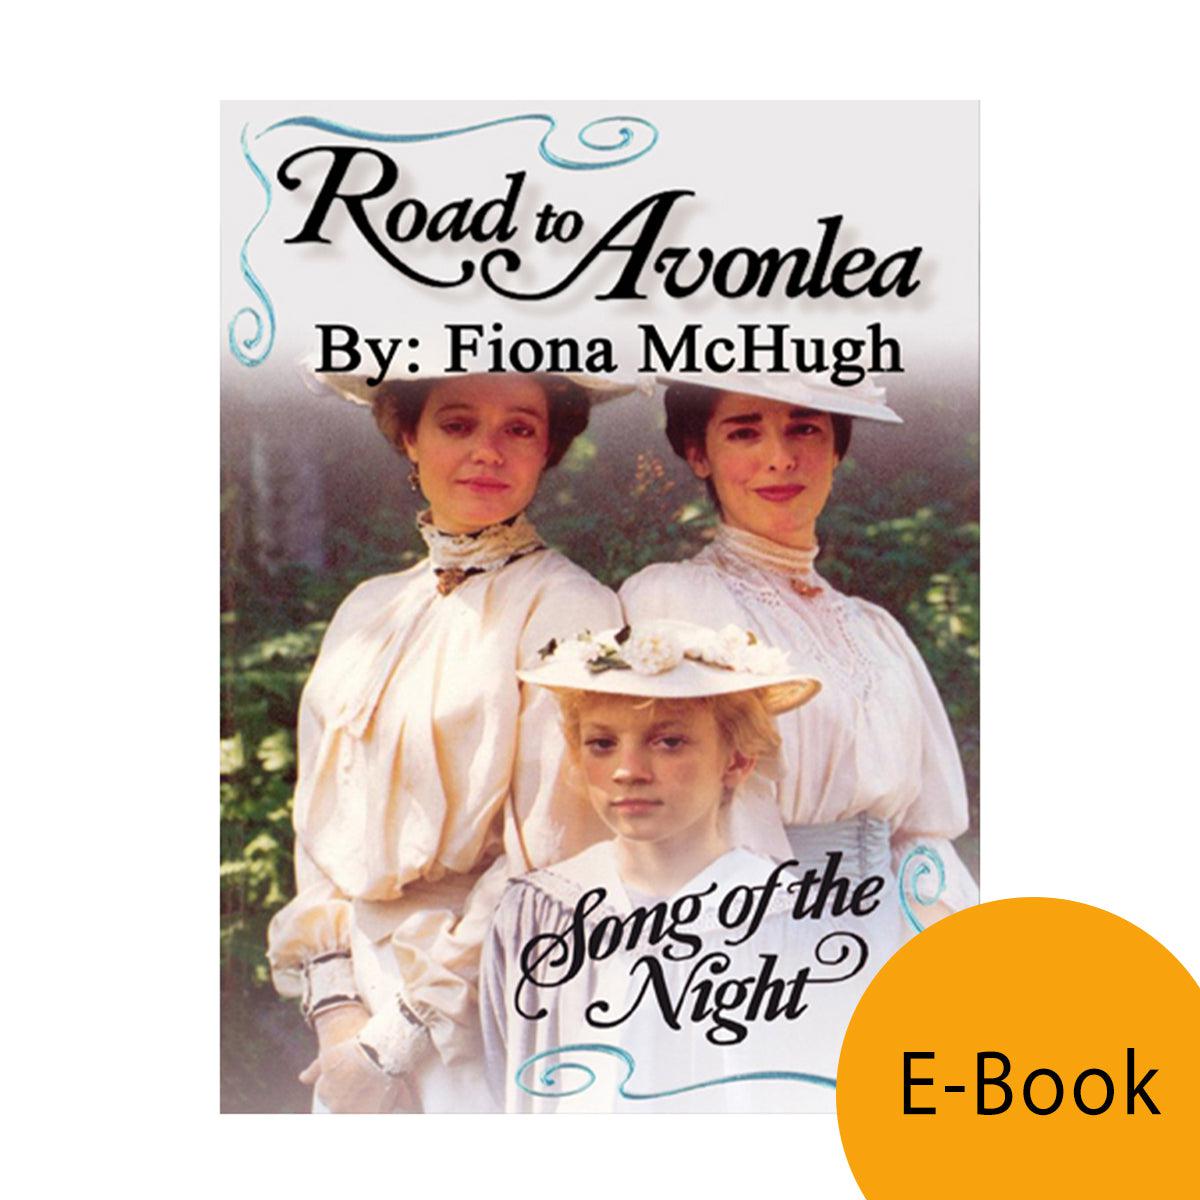 Song of The Night (Road to Avonlea Book 3)- ebook